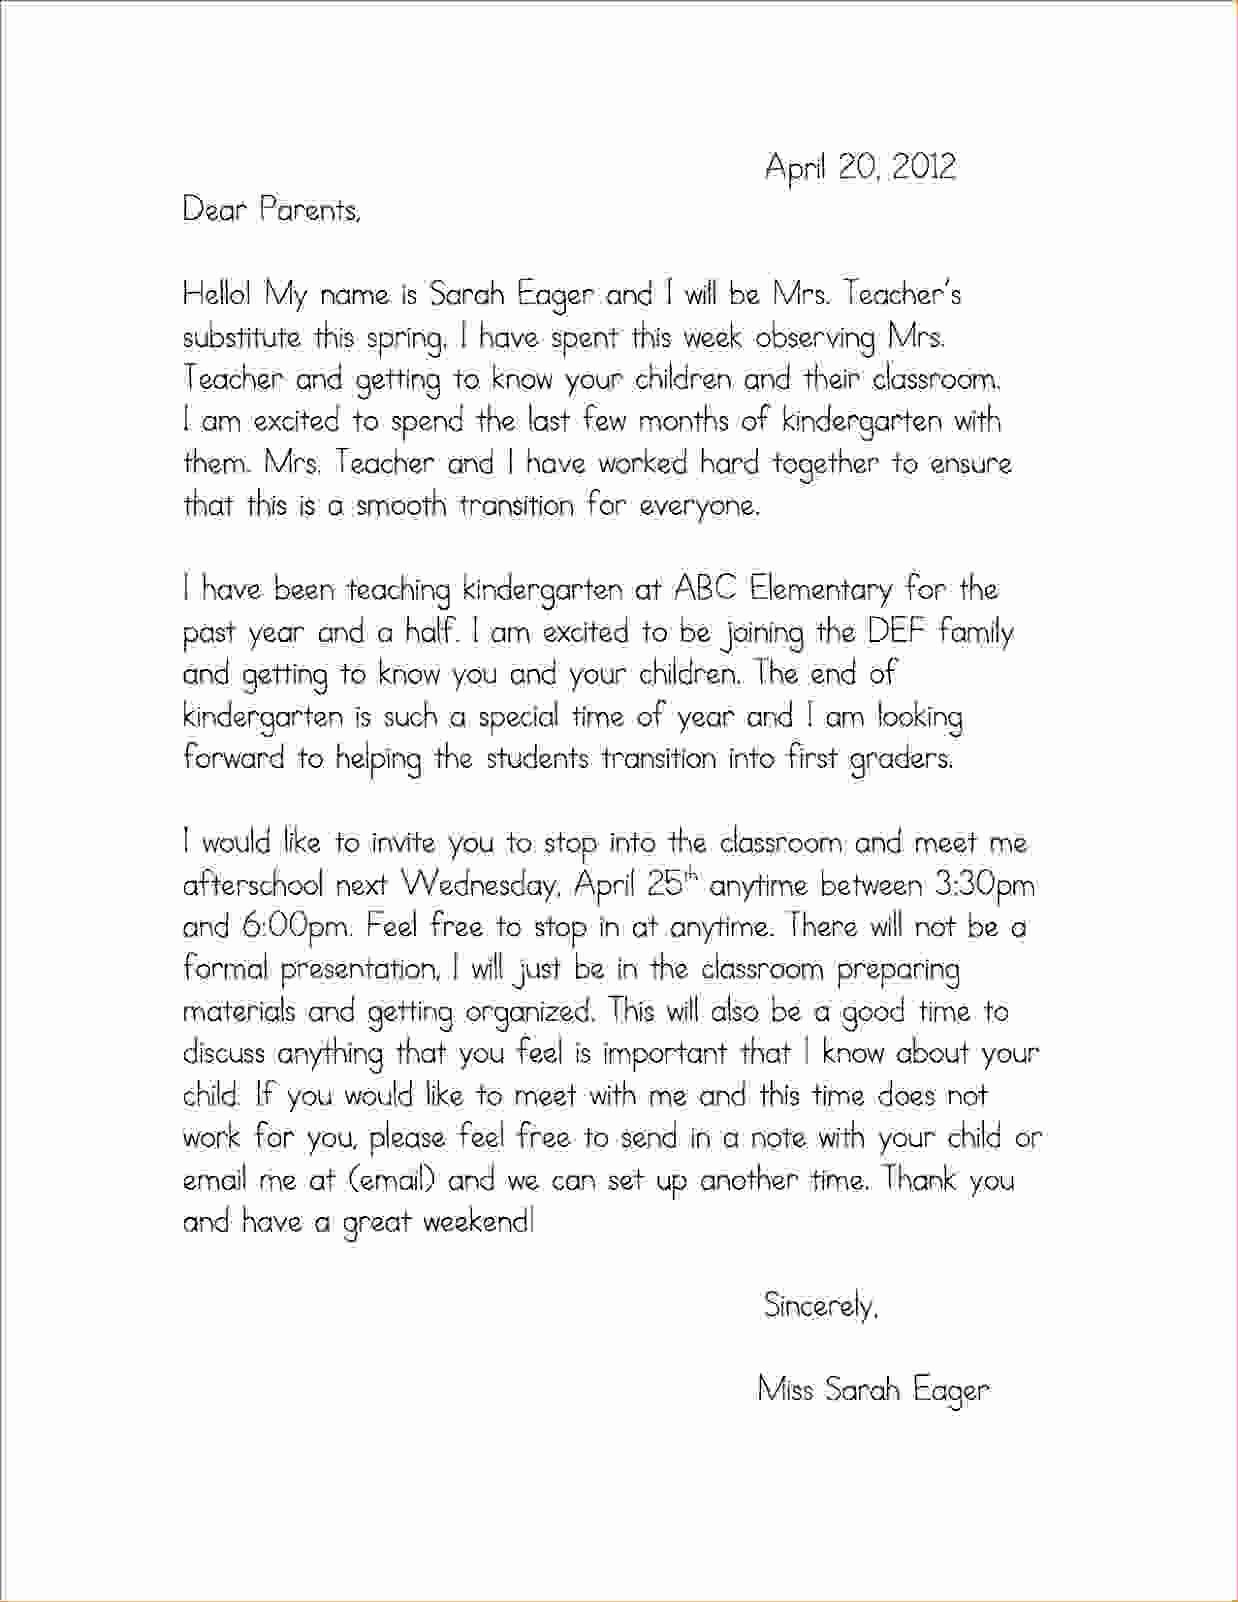 Letters to Parents Template Fresh Image Result for Introduction Letter to Parents From